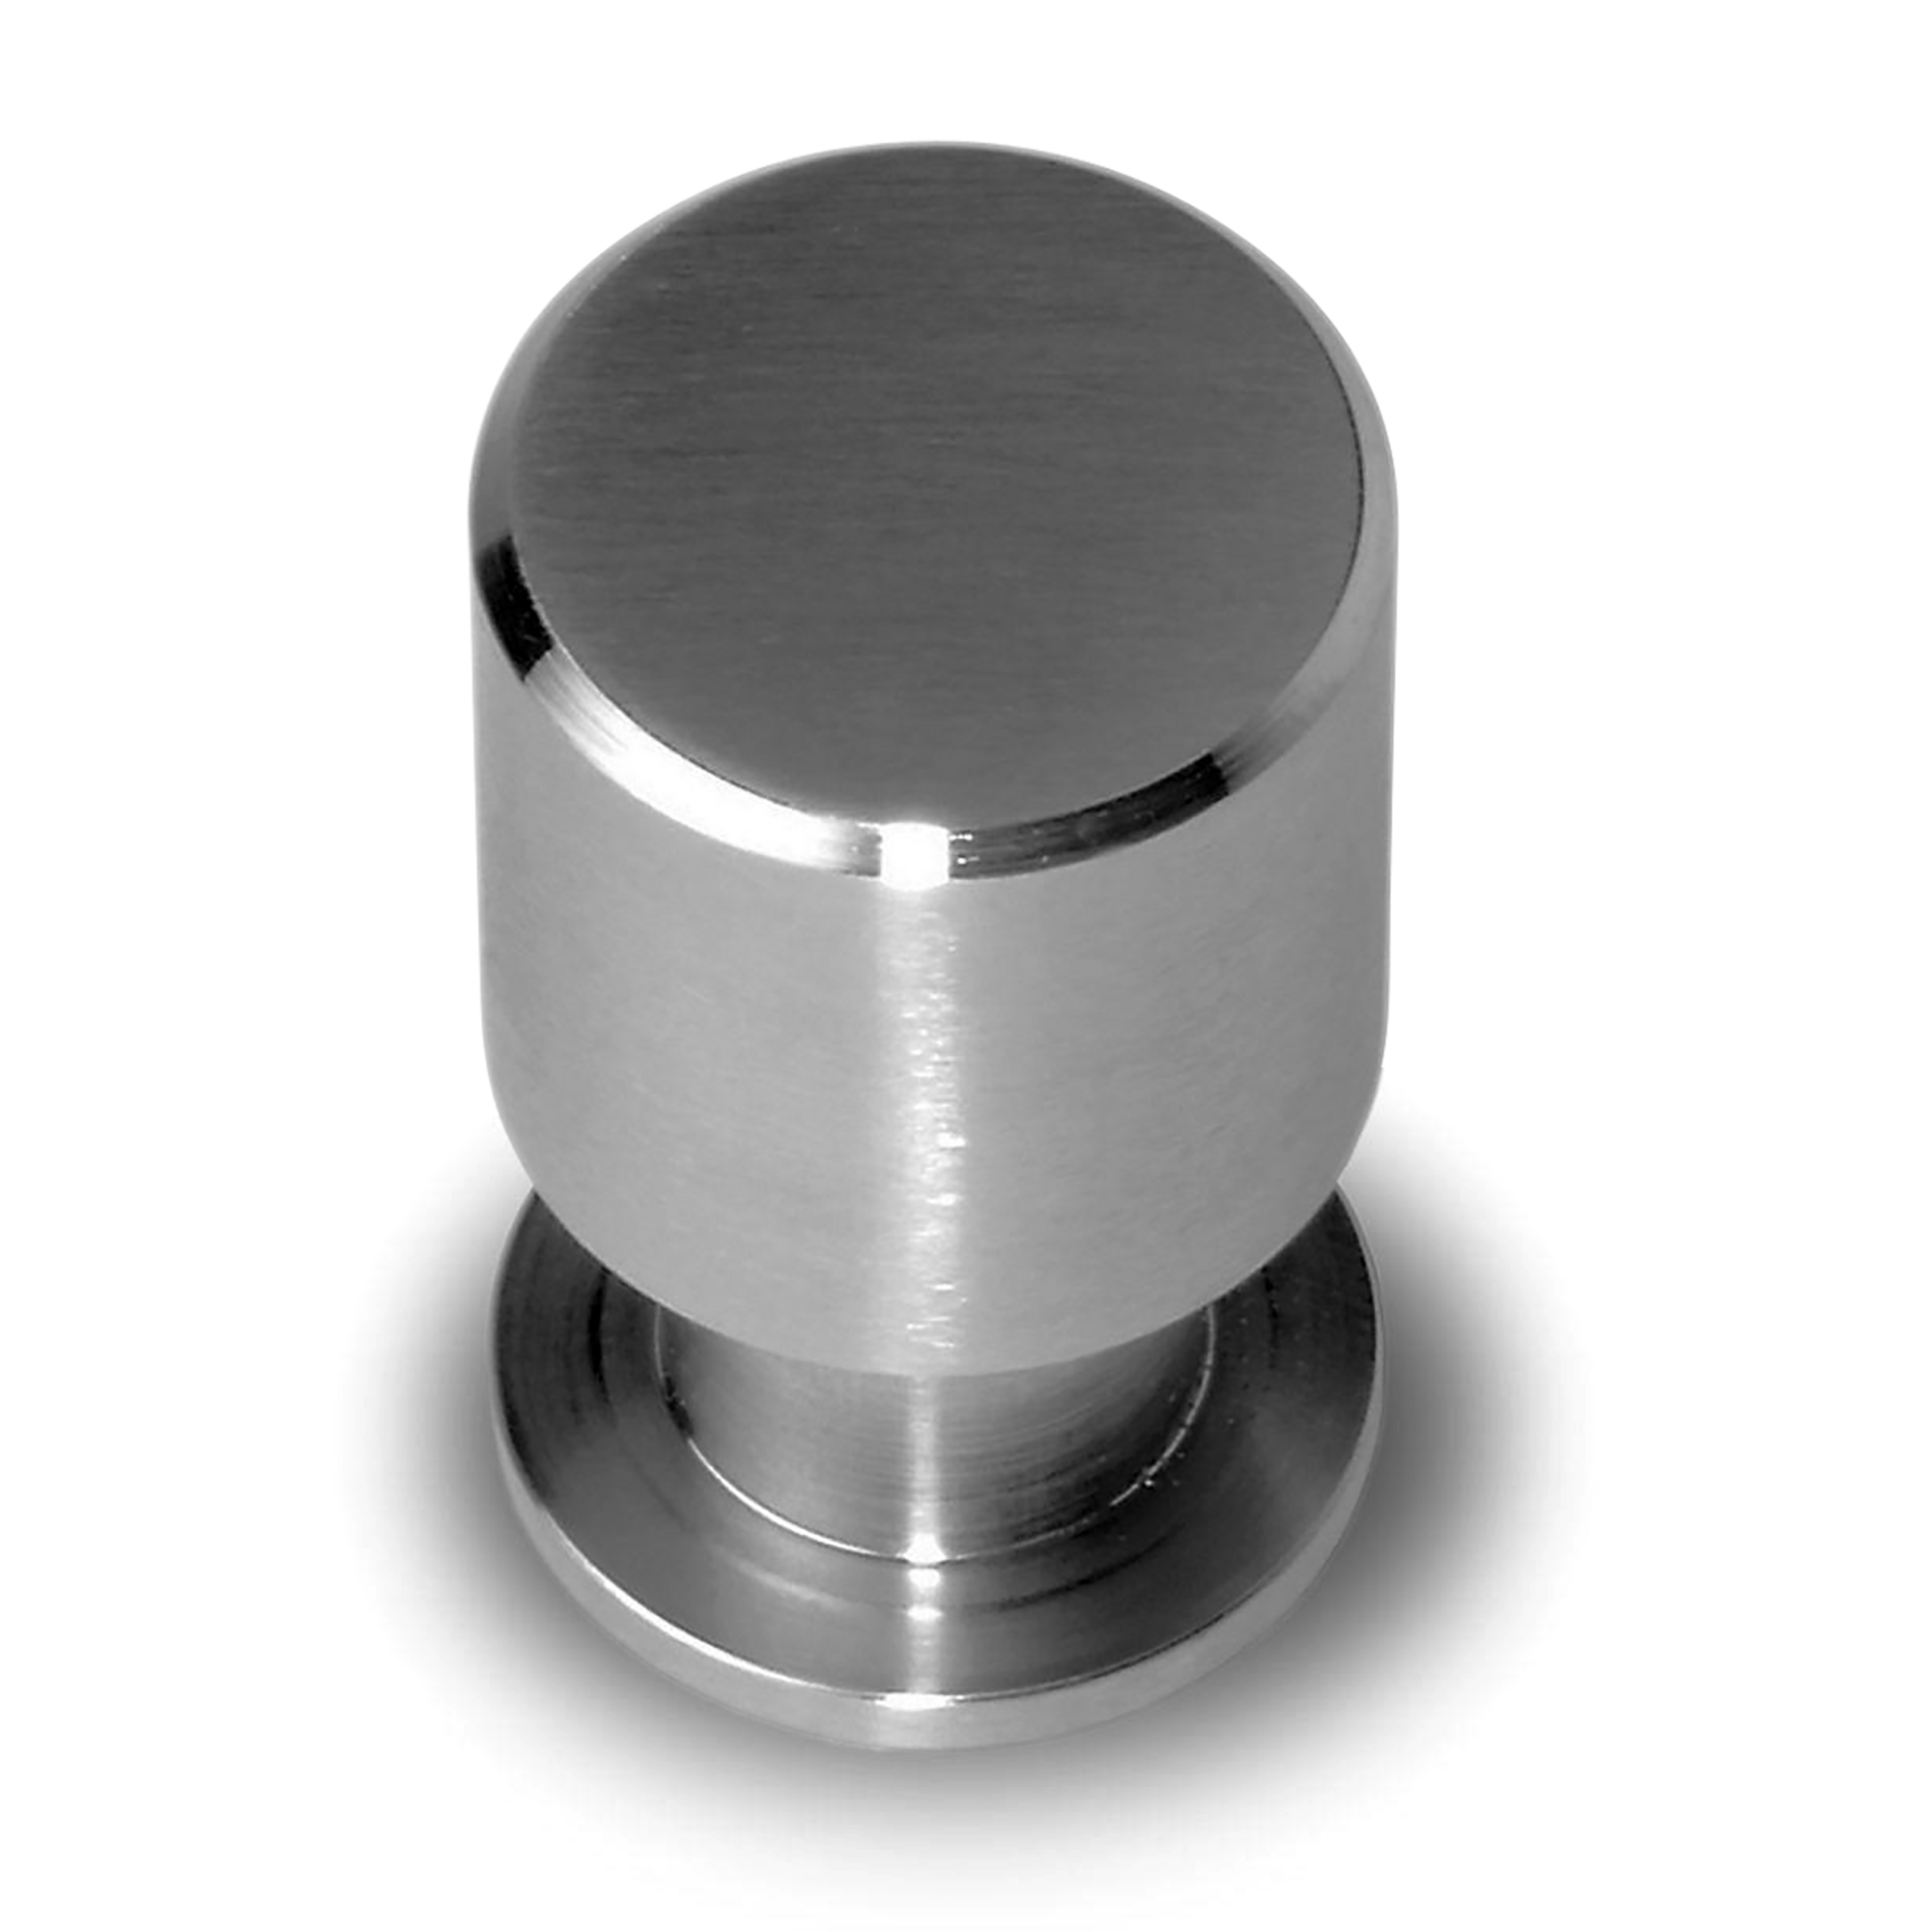 A modern cylindrical stainless steel knob with beveled edges.